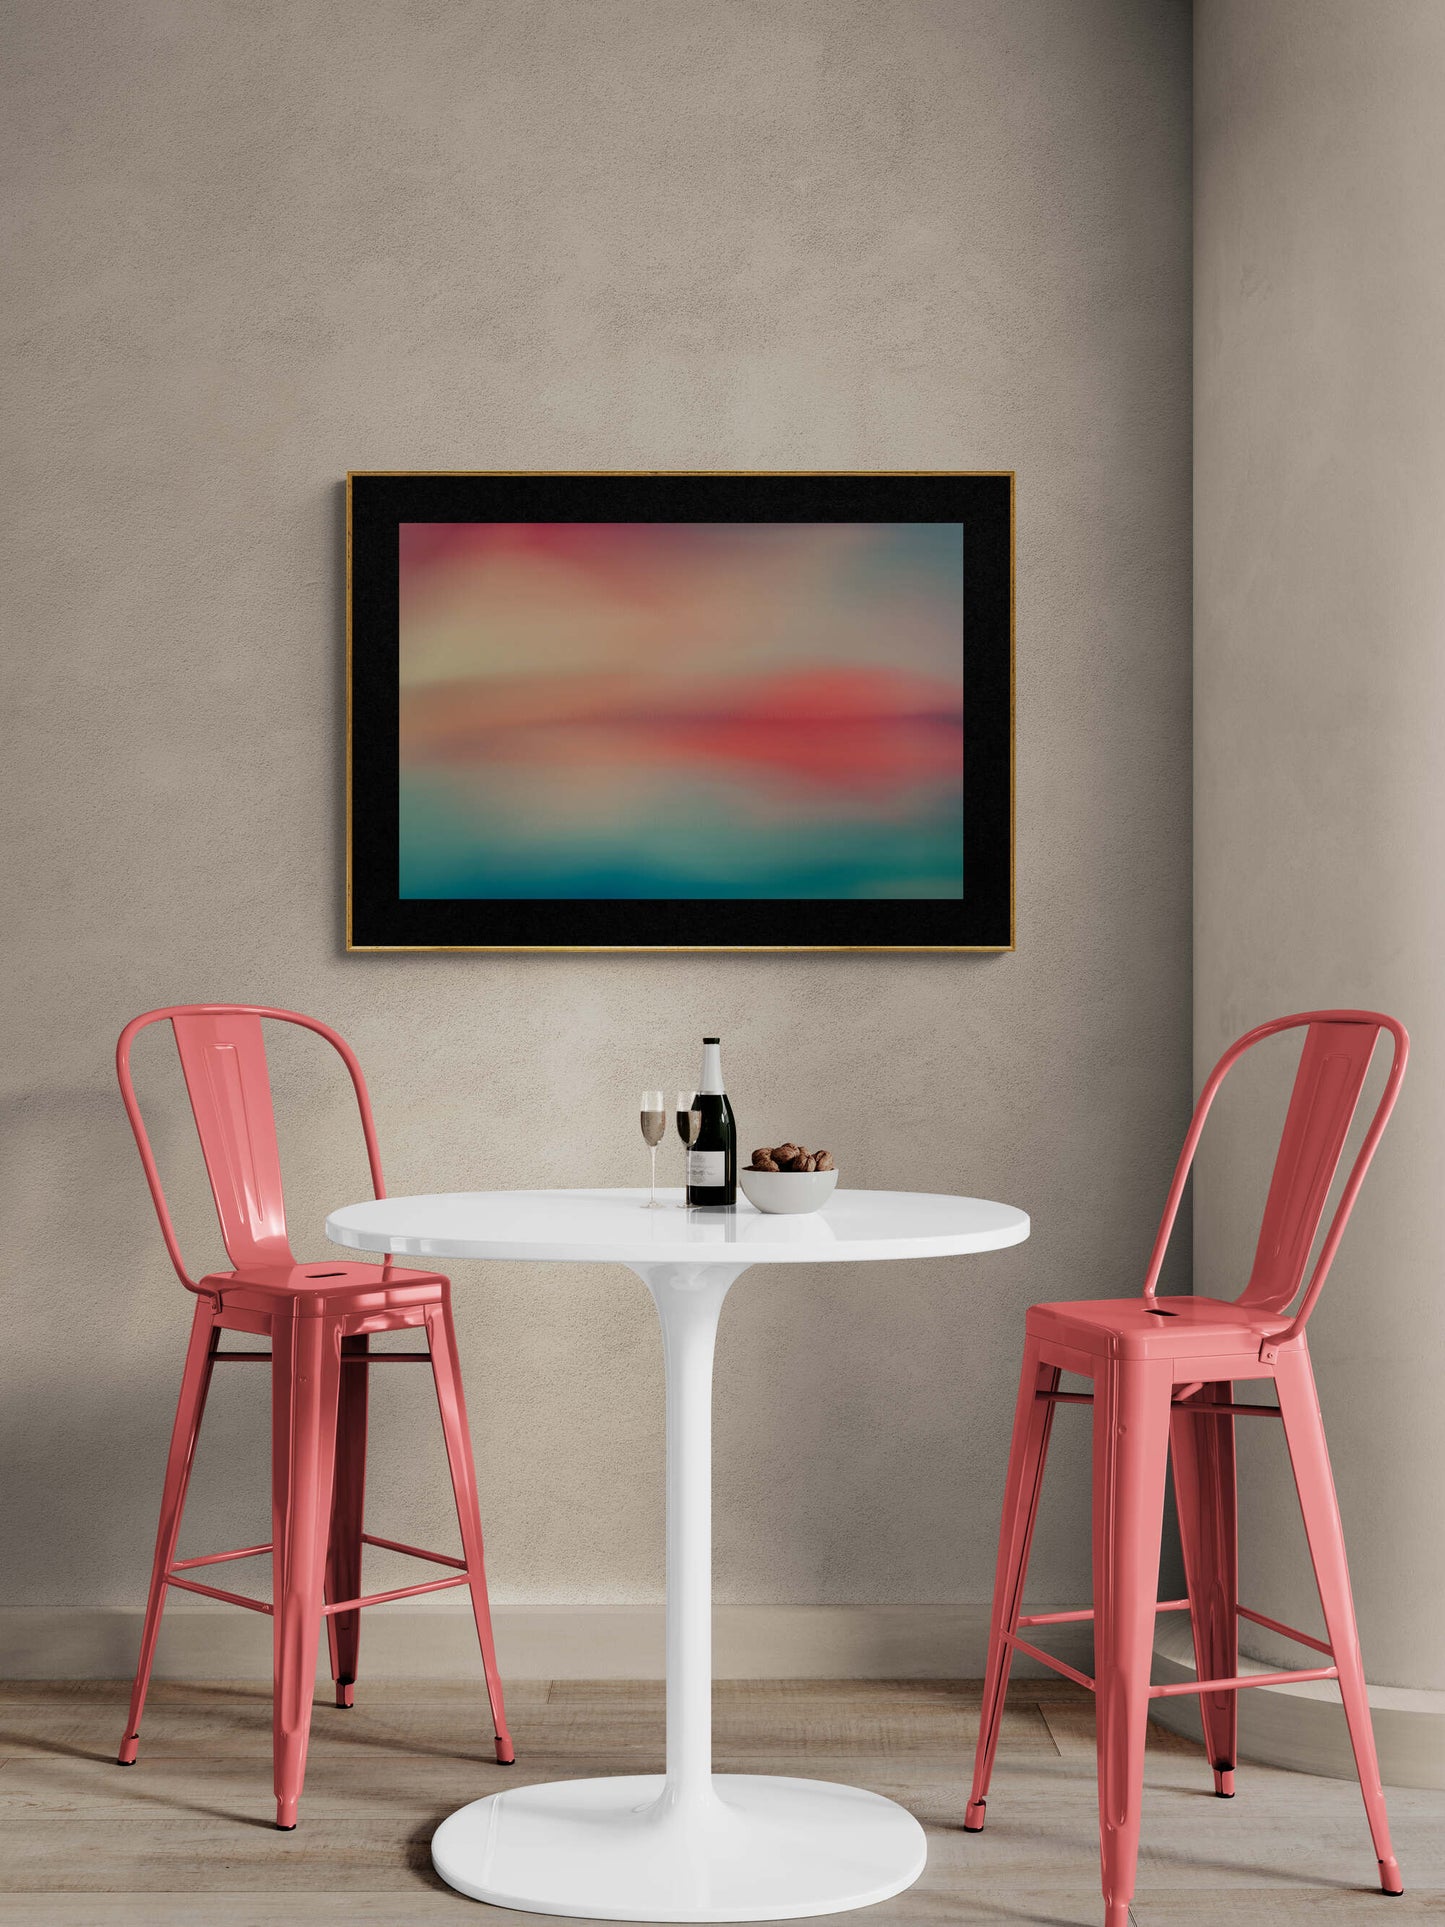 Abstract reflects of blues, greens, teals and coral and peach through long exposure as wall art in a kitchen